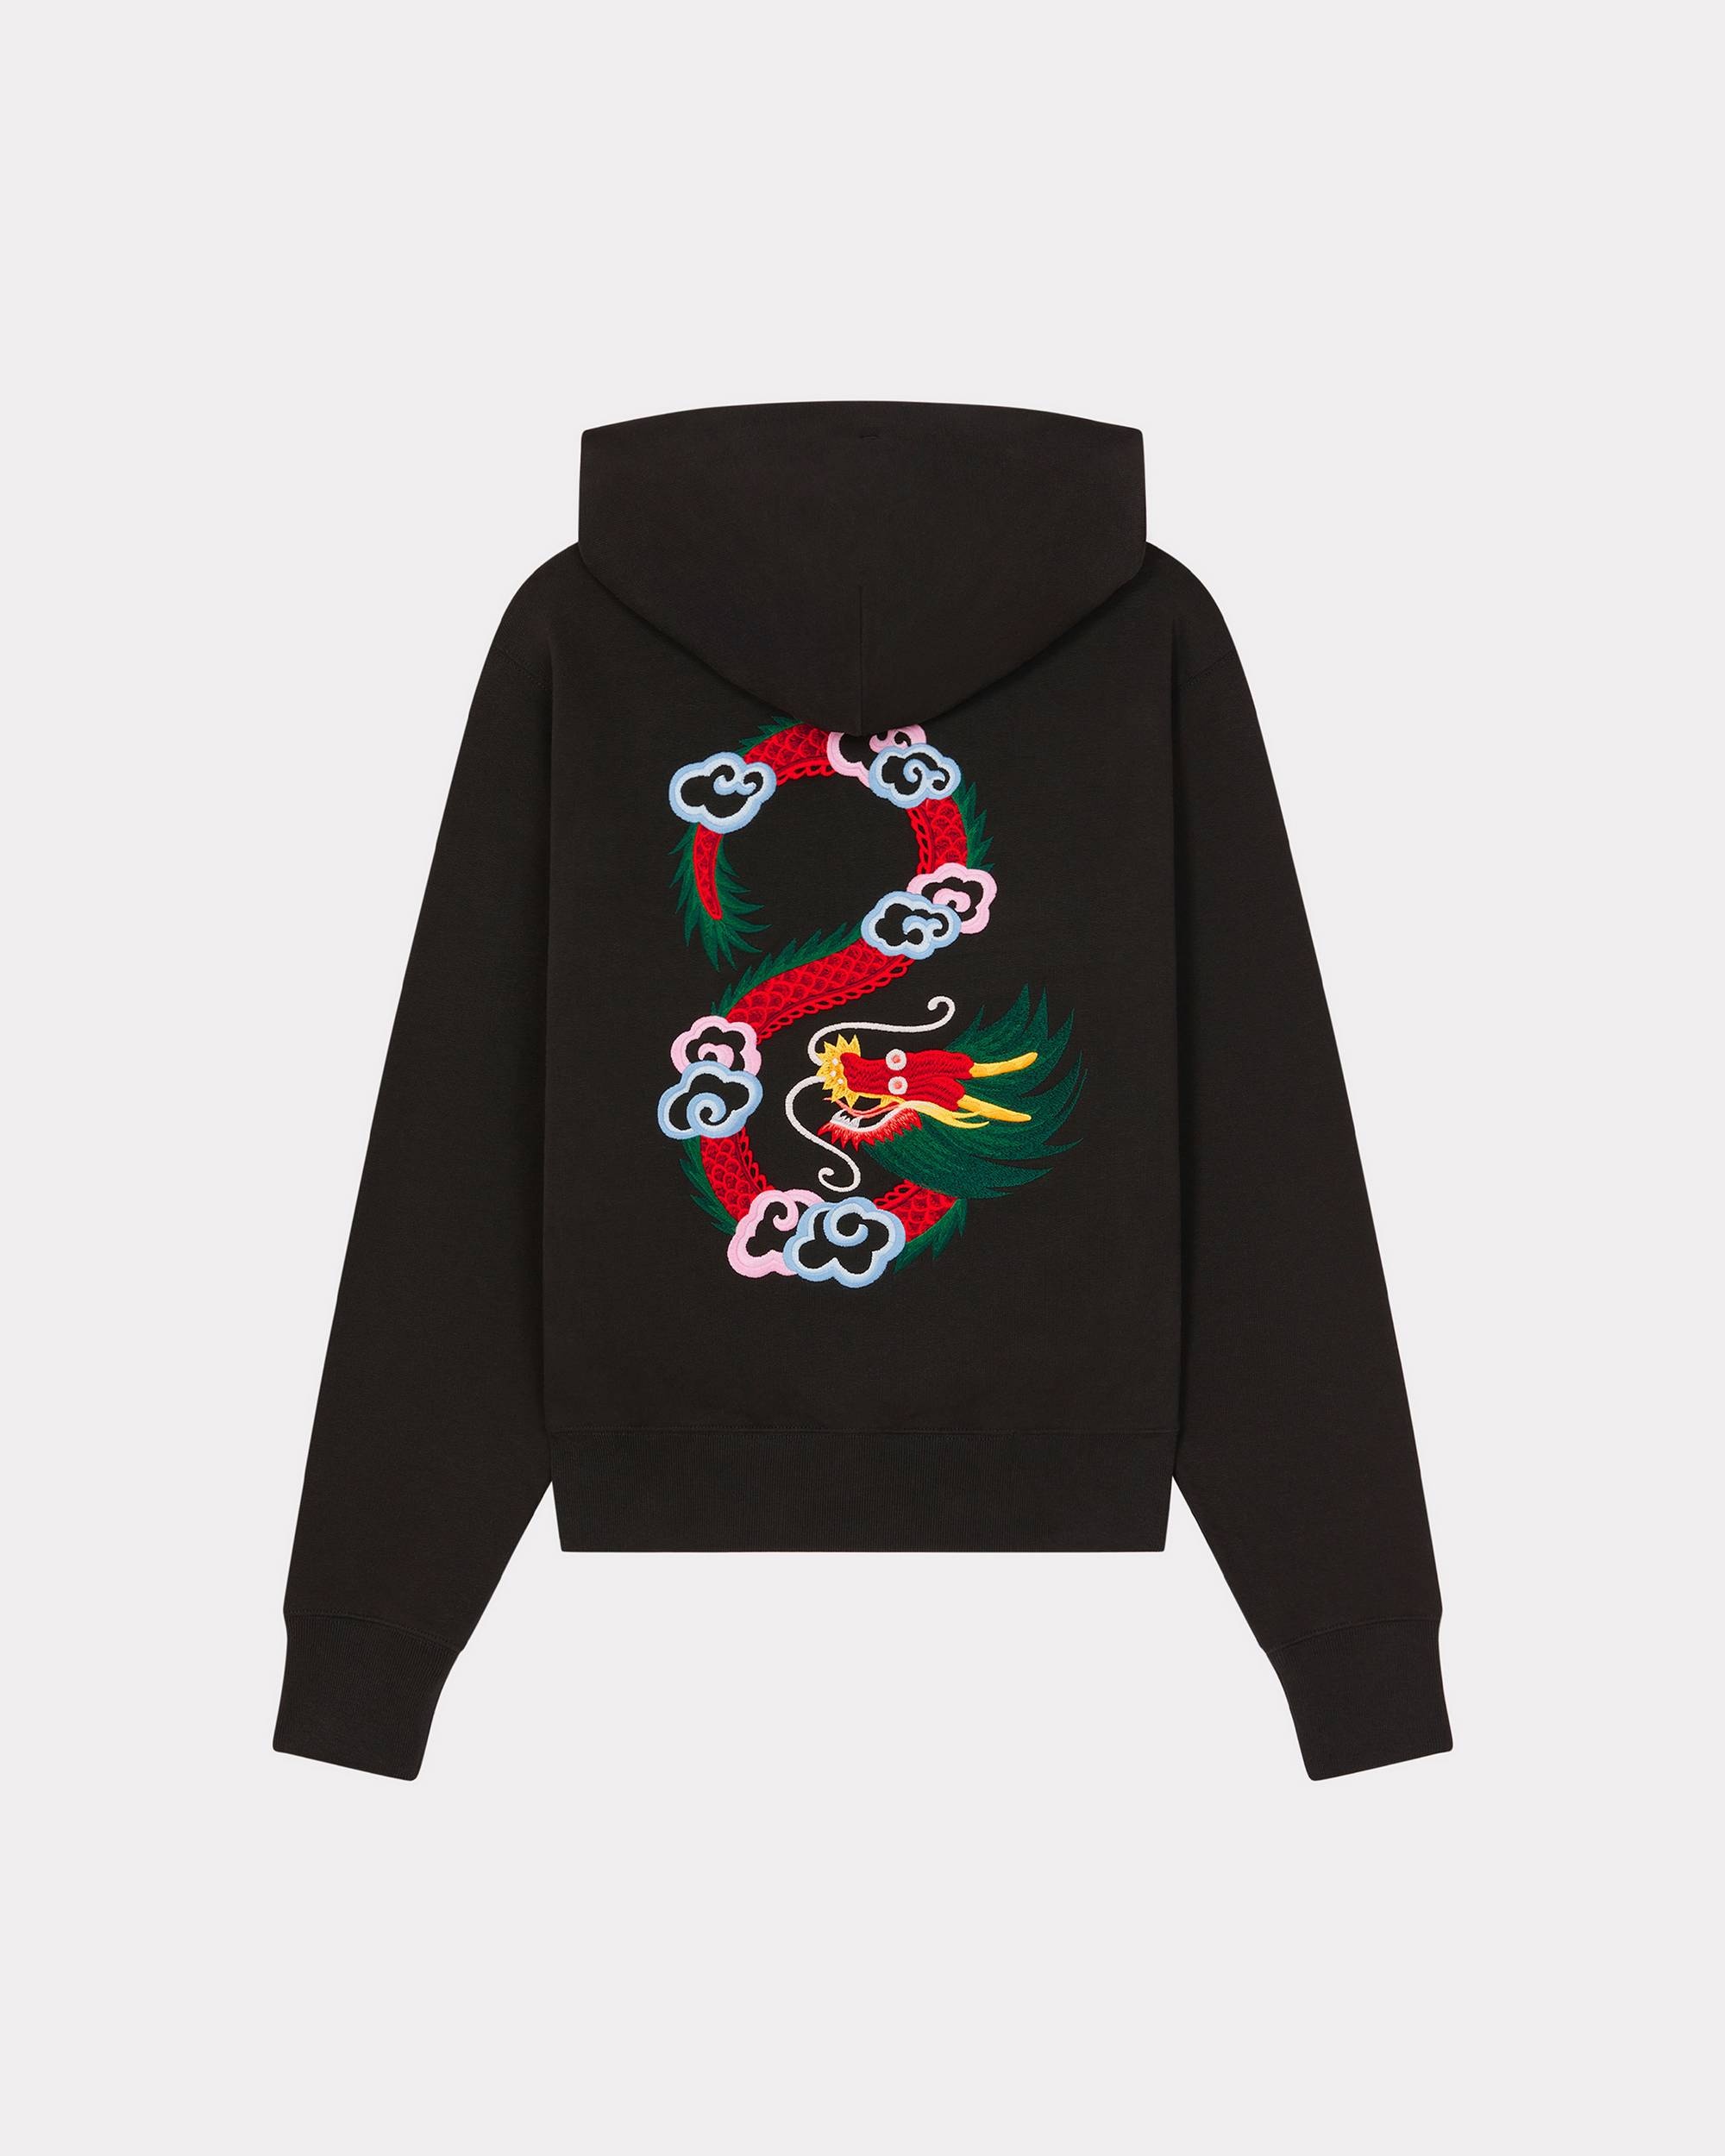 'Year of the Dragon' embroidered classic hoodie sweatshirt - 2